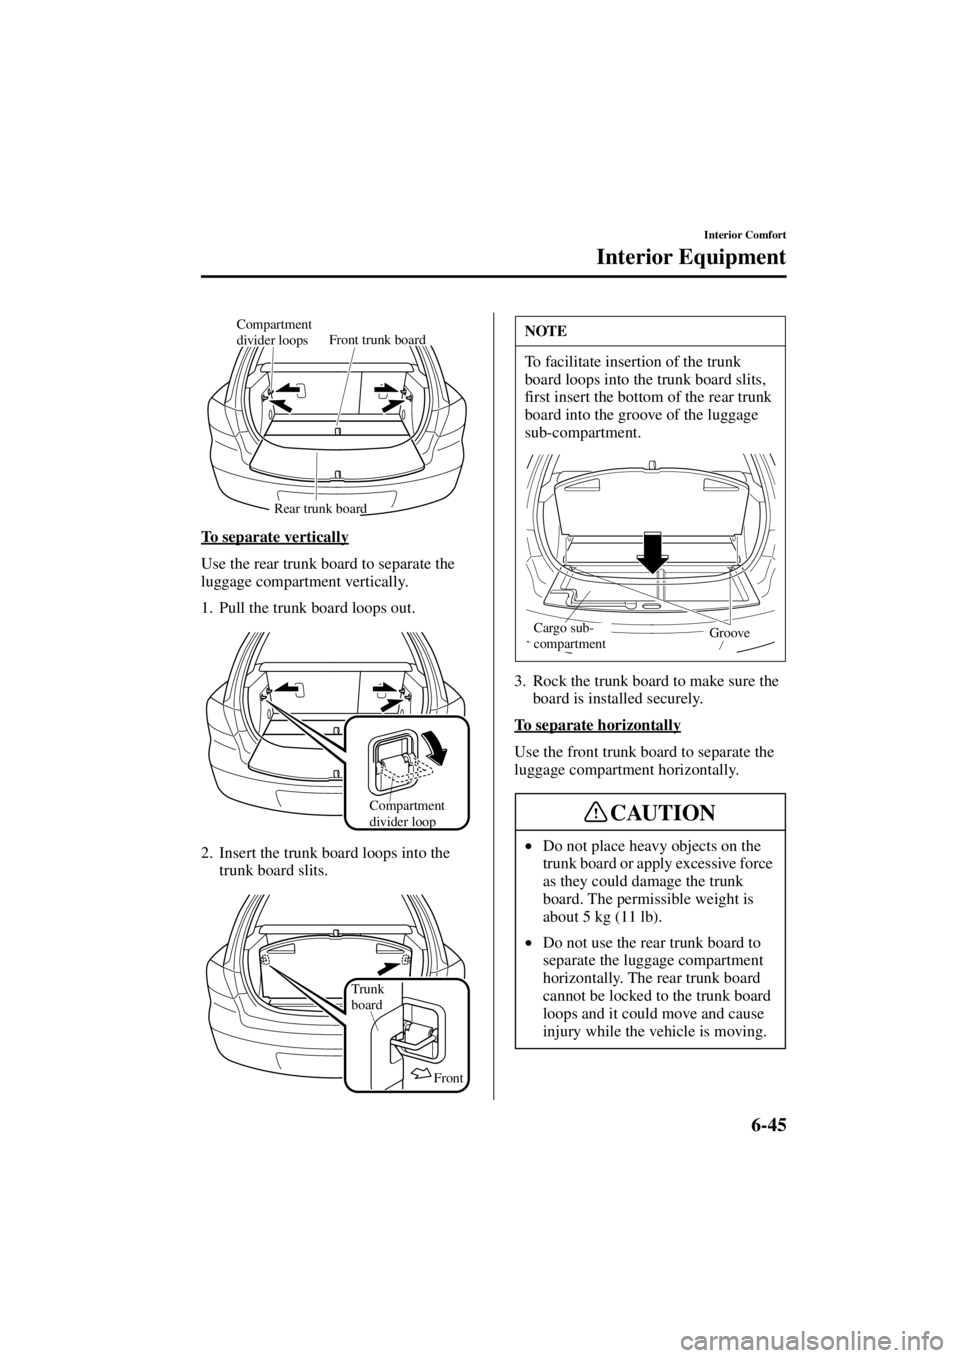 MAZDA MODEL 3 5-DOOR 2004 User Guide 6-45
Interior Comfort
Interior Equipment
Form No. 8S18-EA-03I
To separate vertically
Use the rear trunk board to separate the 
luggage compartment vertically.
1. Pull the trunk board loops out.
2. Ins